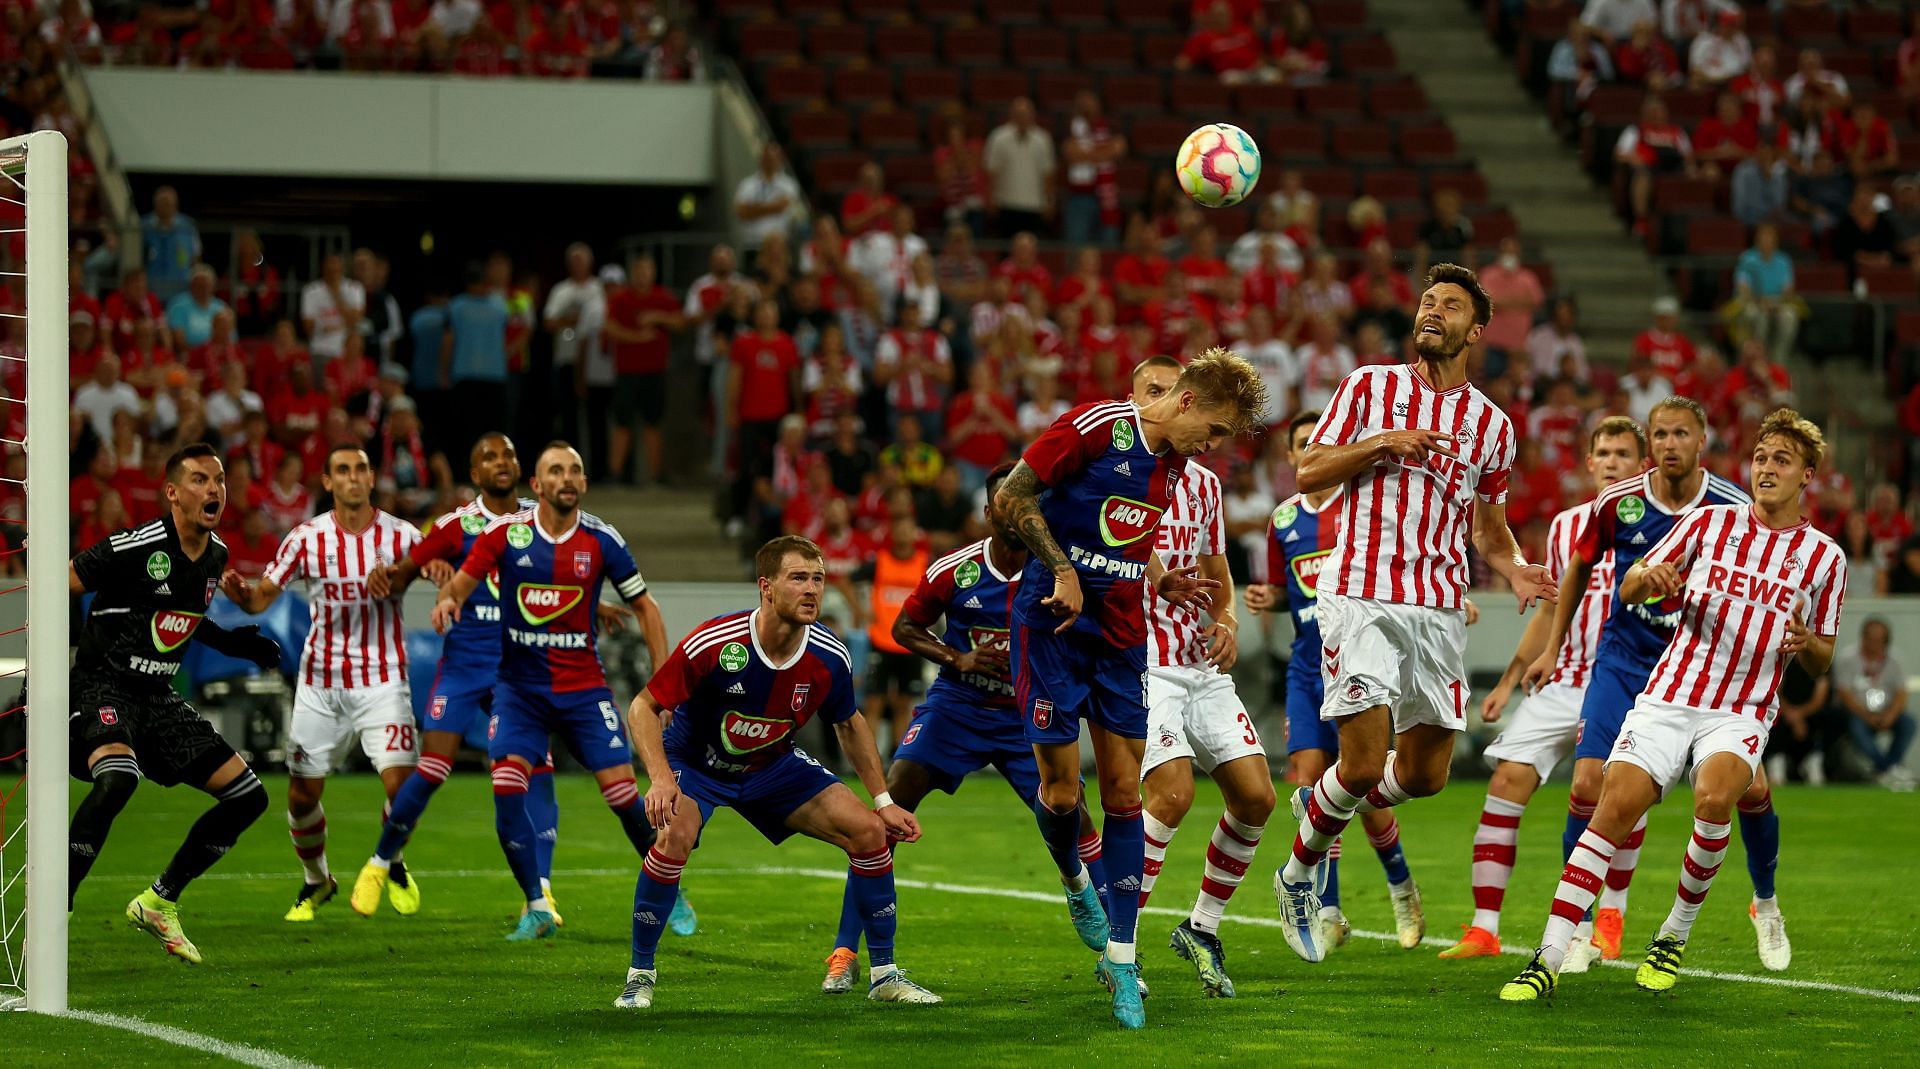 Slovacko did enough in the first leg to have any major challenge in getting through.